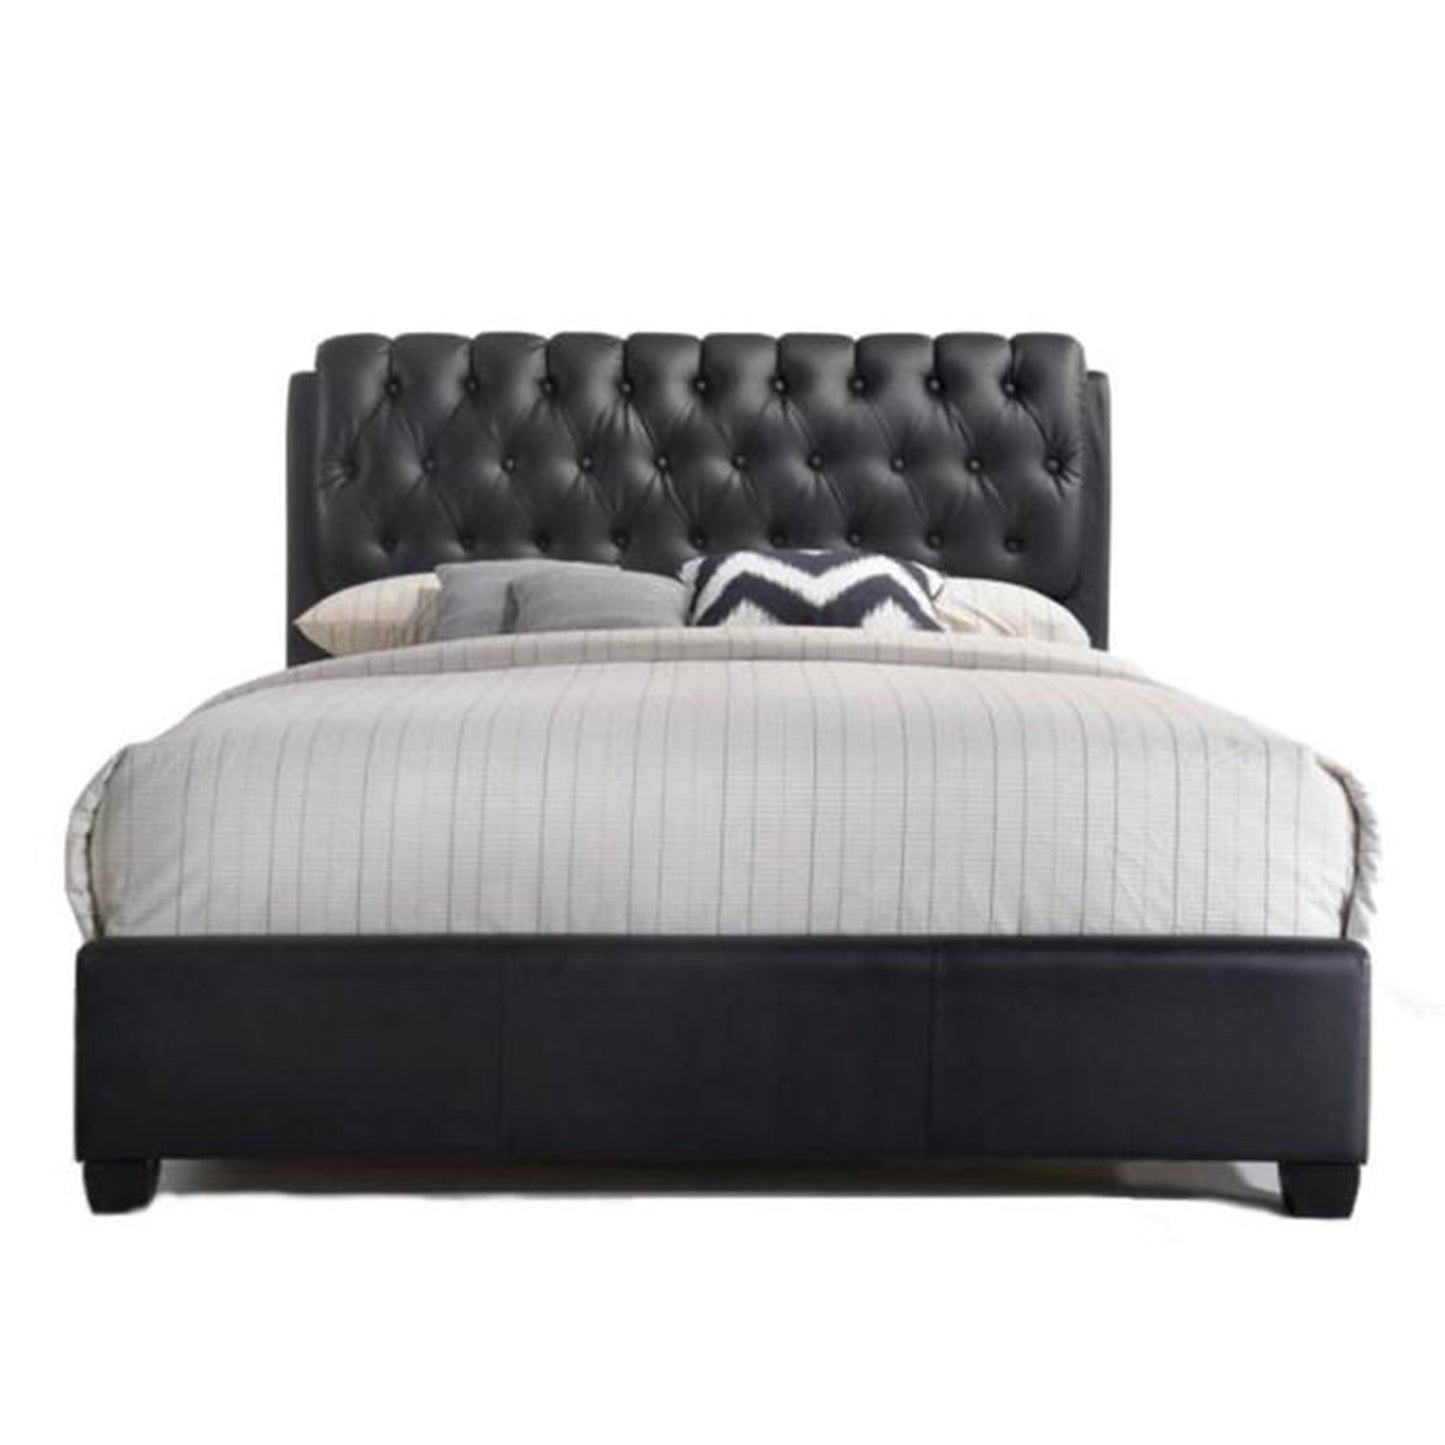 Queen Tufted Black Upholstered Faux Leather Bed With Nailhead Trim